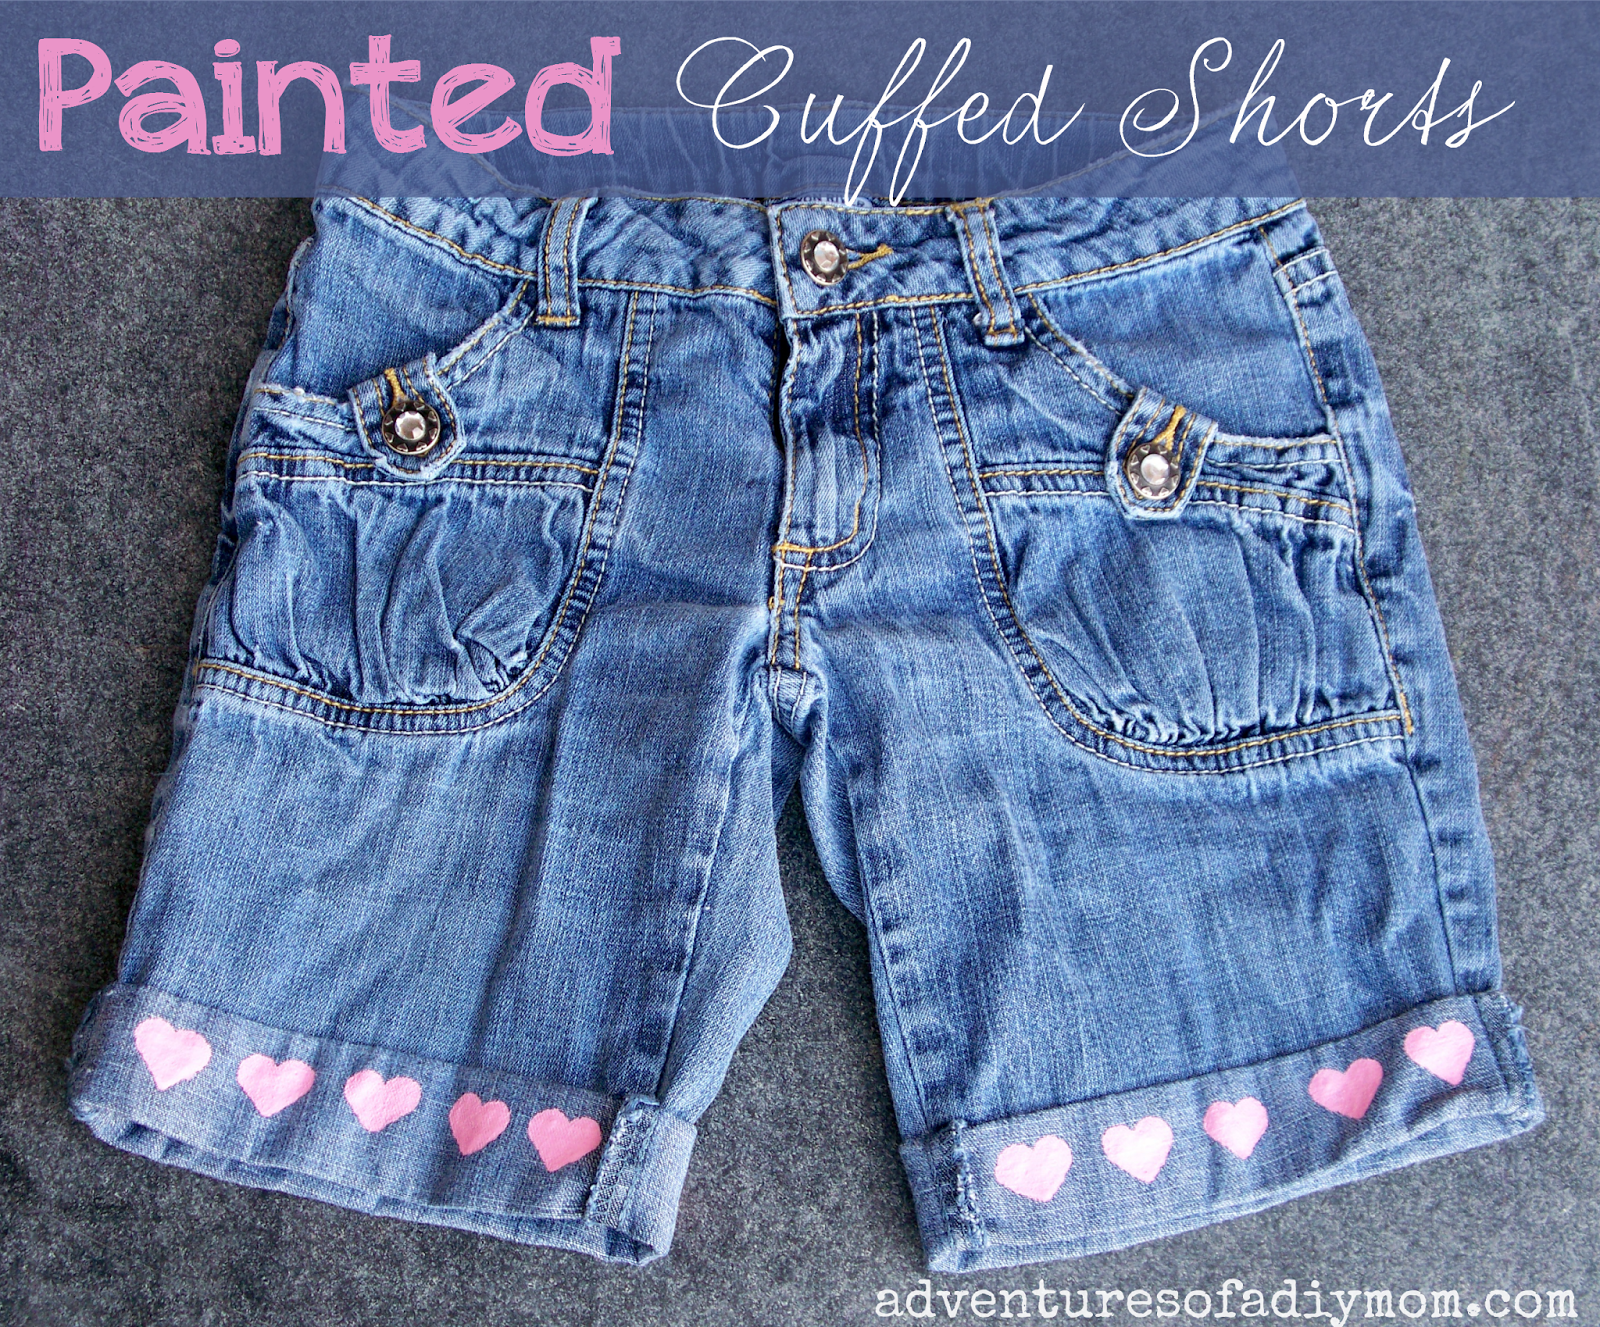 Painted Cuffed Shorts - Cut off Jean Shorts Series